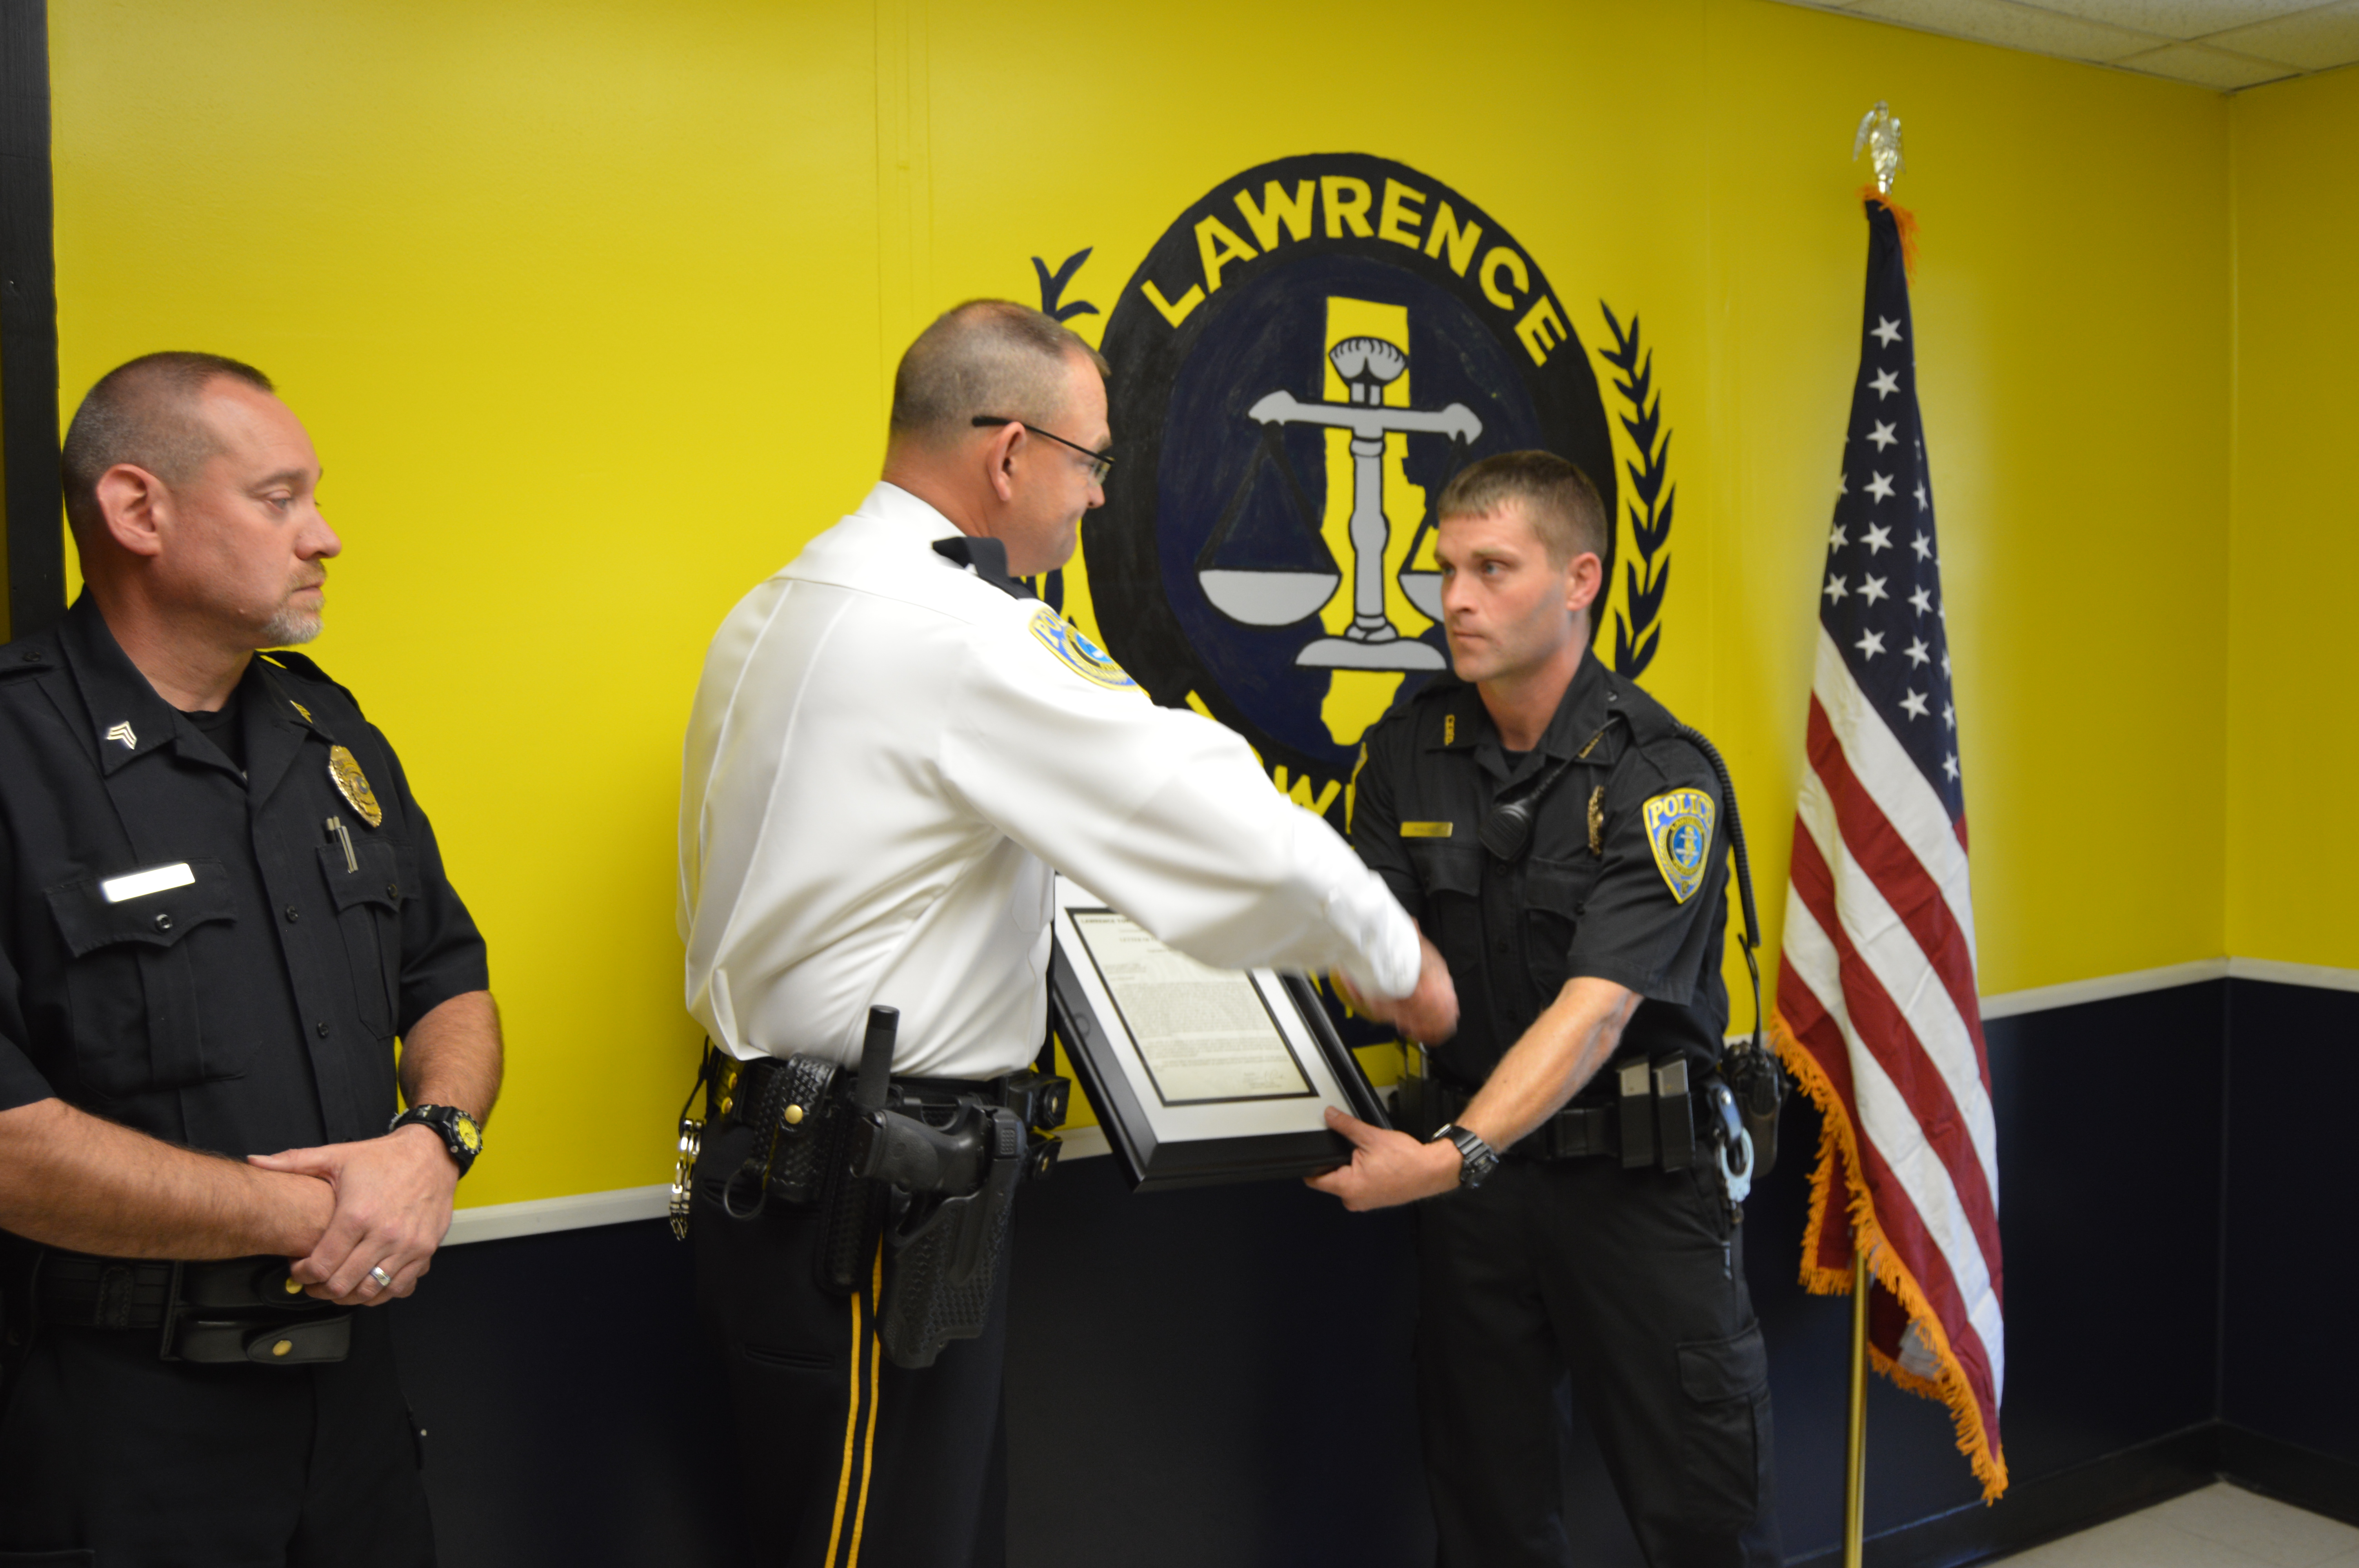 Lawrence Township Police Chief Douglas Clark, center, and Sgt. Jim Glass, left, present a letter of commendation to Officer Jonathan Walker Wednesday at the police department. Walker, Clearfield Borough Police Sergeant Nathan Curry, and civilians Dakota Taylor and Damion Palmer were instrumental in rescuing 74-year-old Frances Lutz from a structure fire at Lawrence Park Village on Sept. 23. (Photo by Kimberly Finnigan)